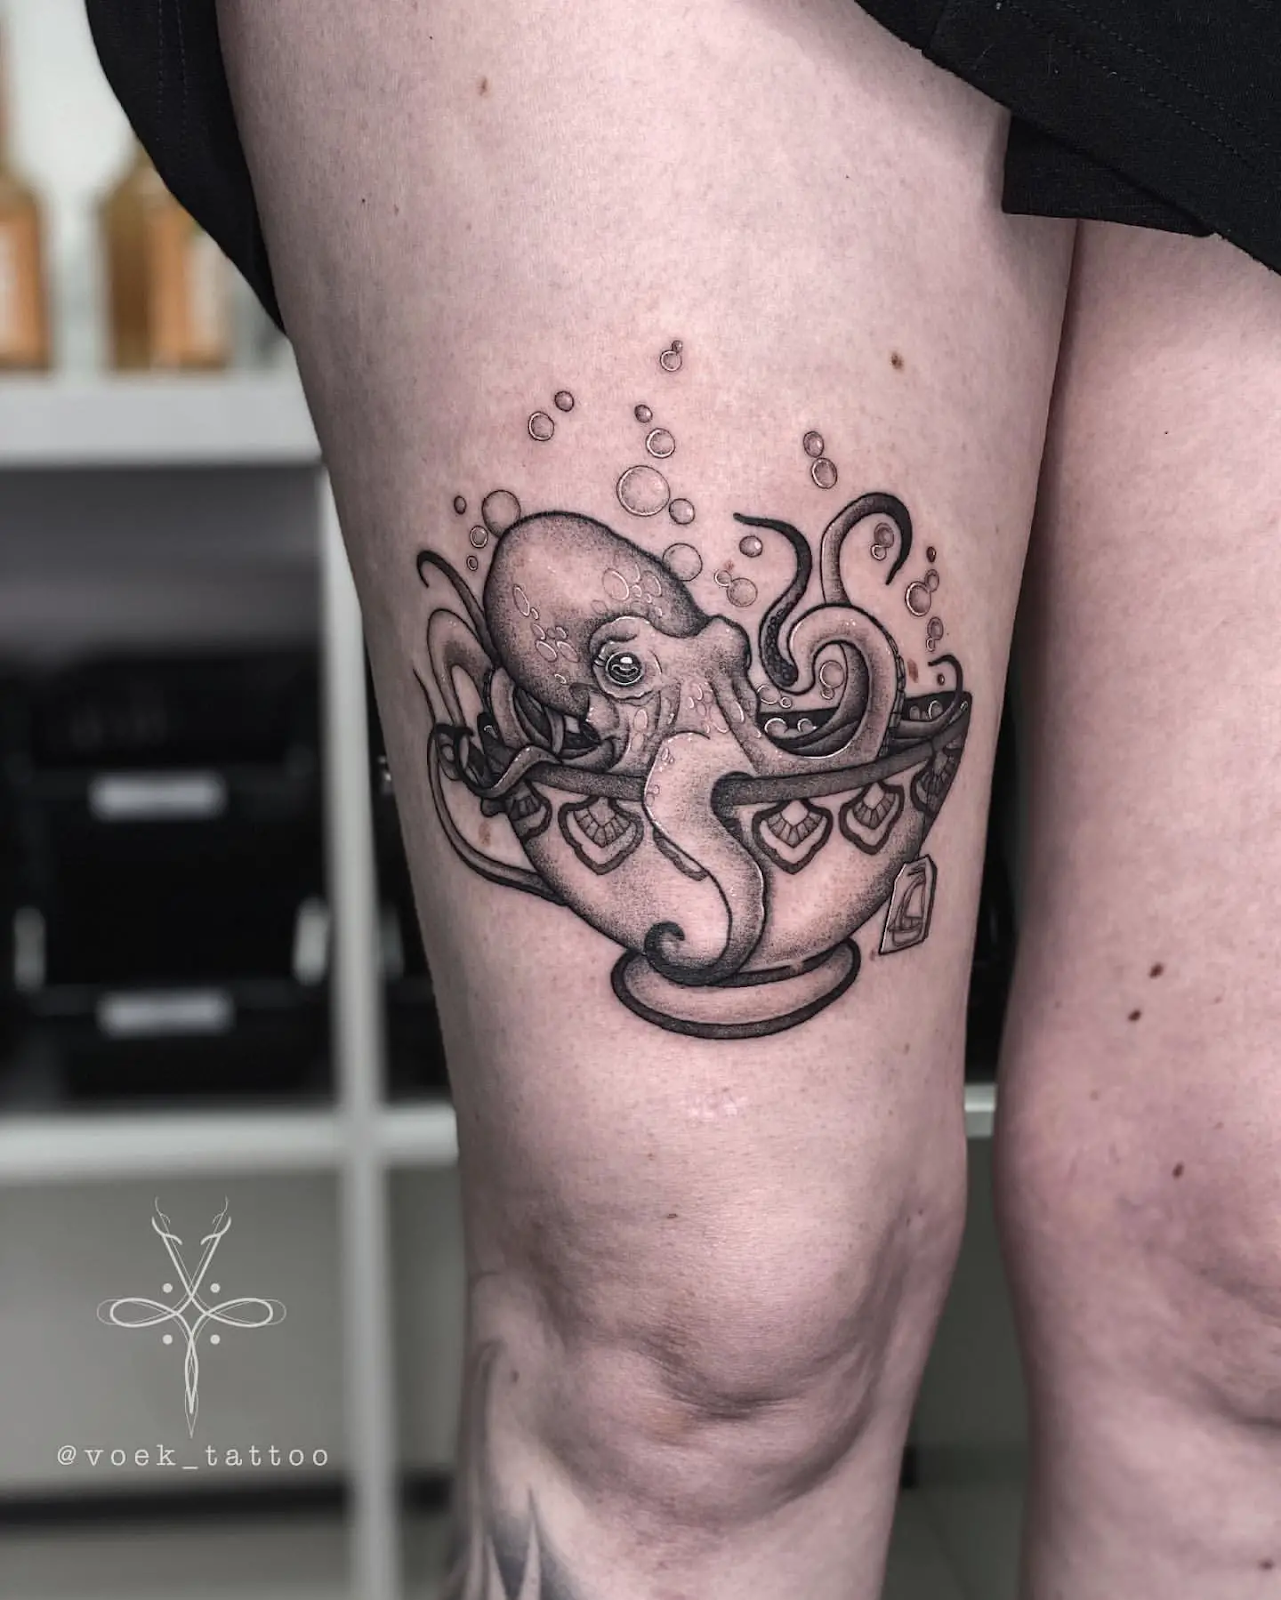 Picture showing a black and gray octopus tattoo design on a the thigh of a lady